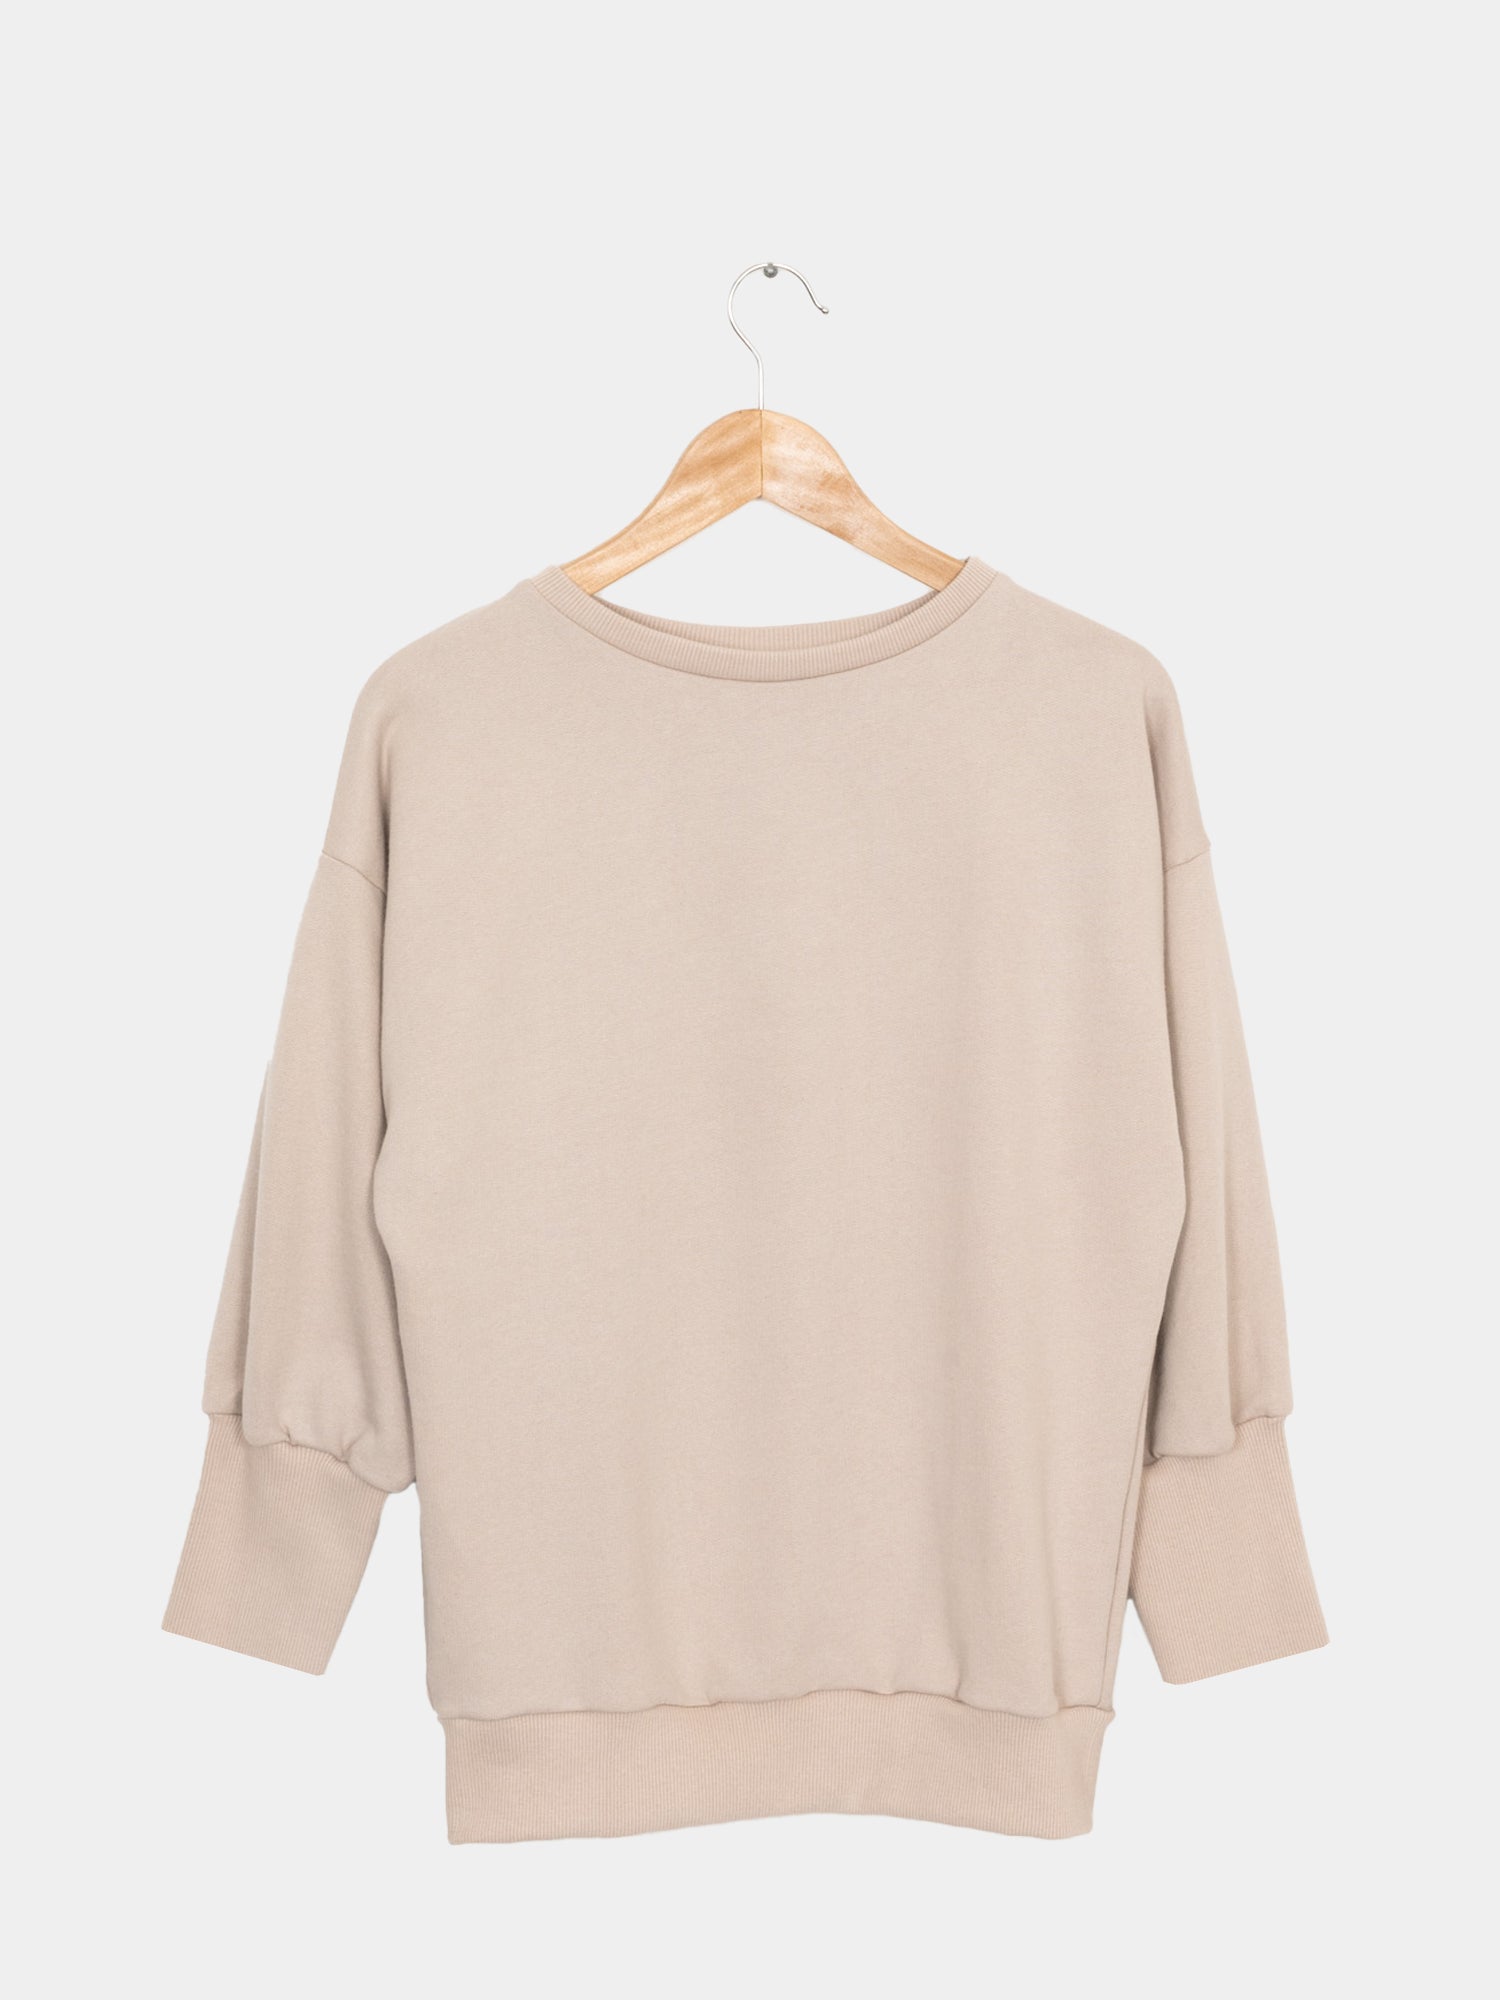 Pump sweater made from organic cotton - Sand